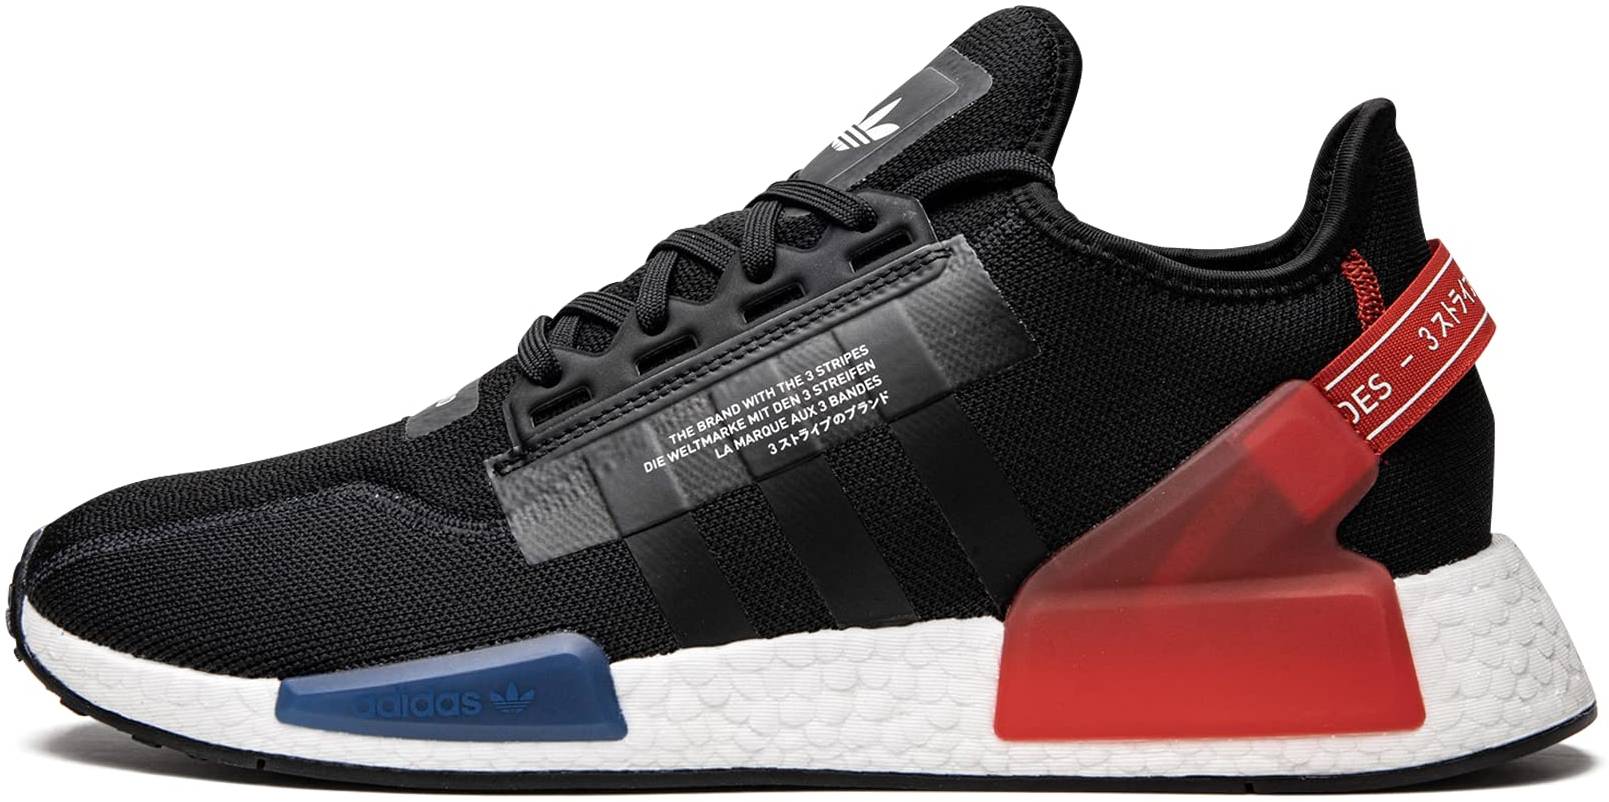 Adidas NMD_R1 Review, Facts, Comparison RunRepeat